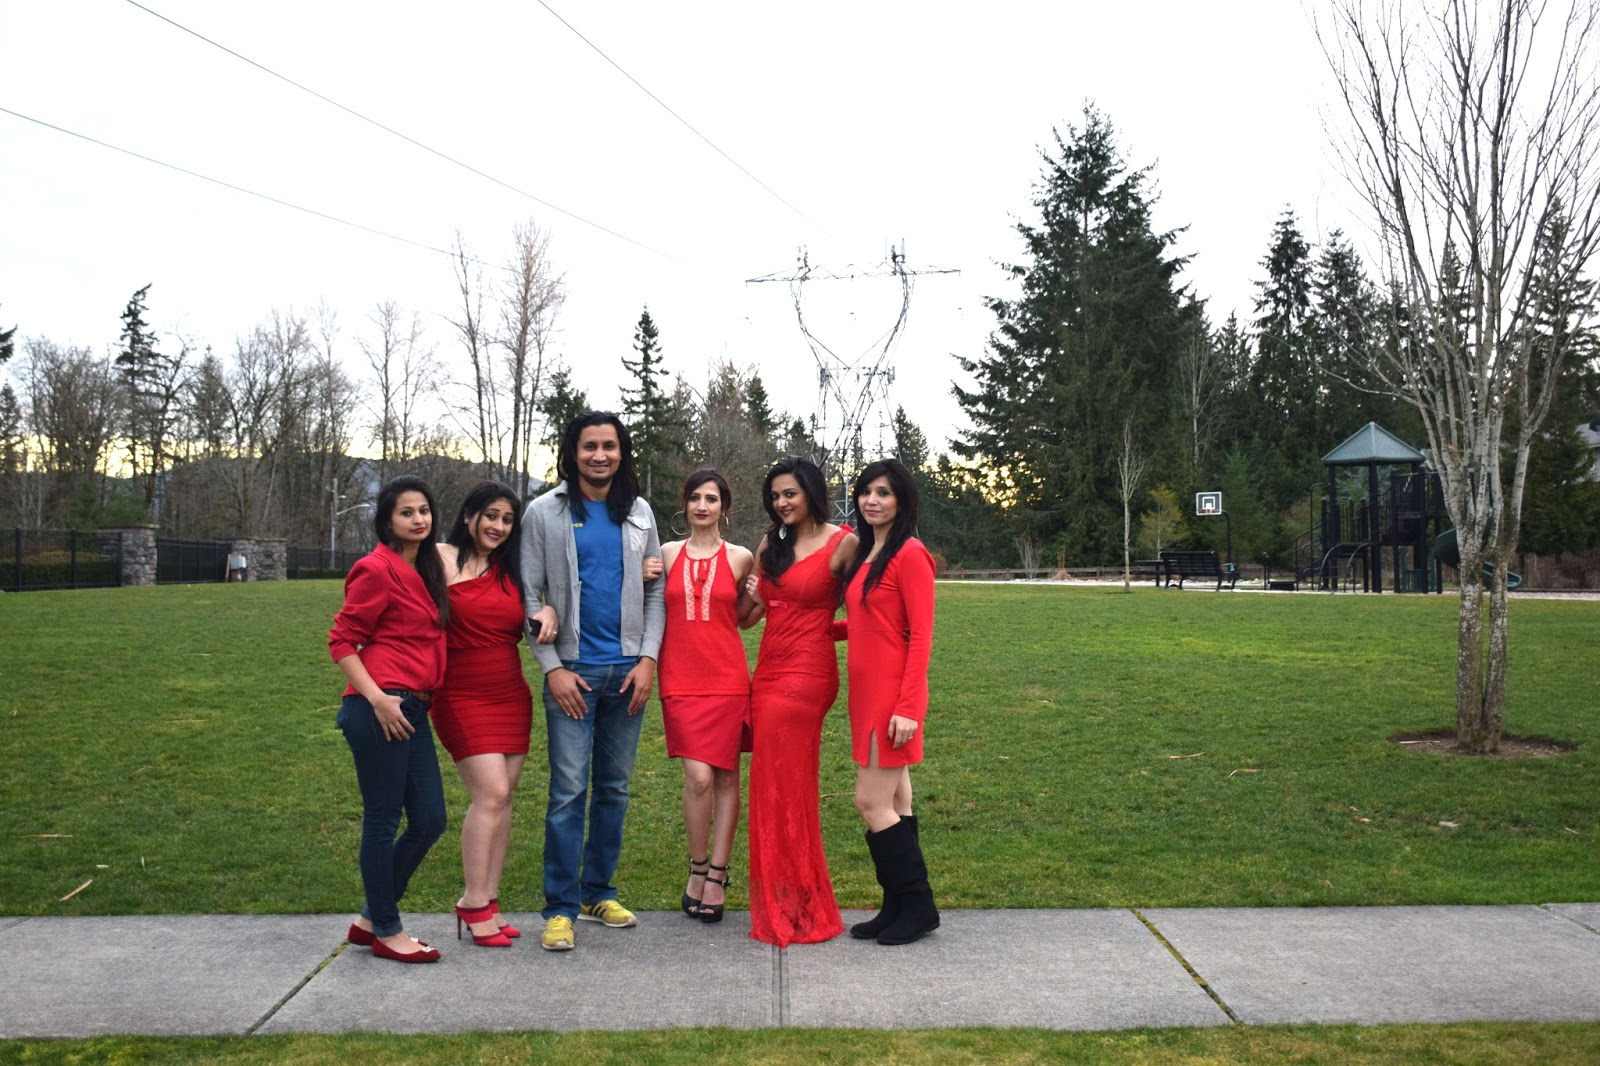 gals all wearing red dress, group pic of indian gals, different types of red dresses, Seattle indian ladies, red lipstick on brown skin  